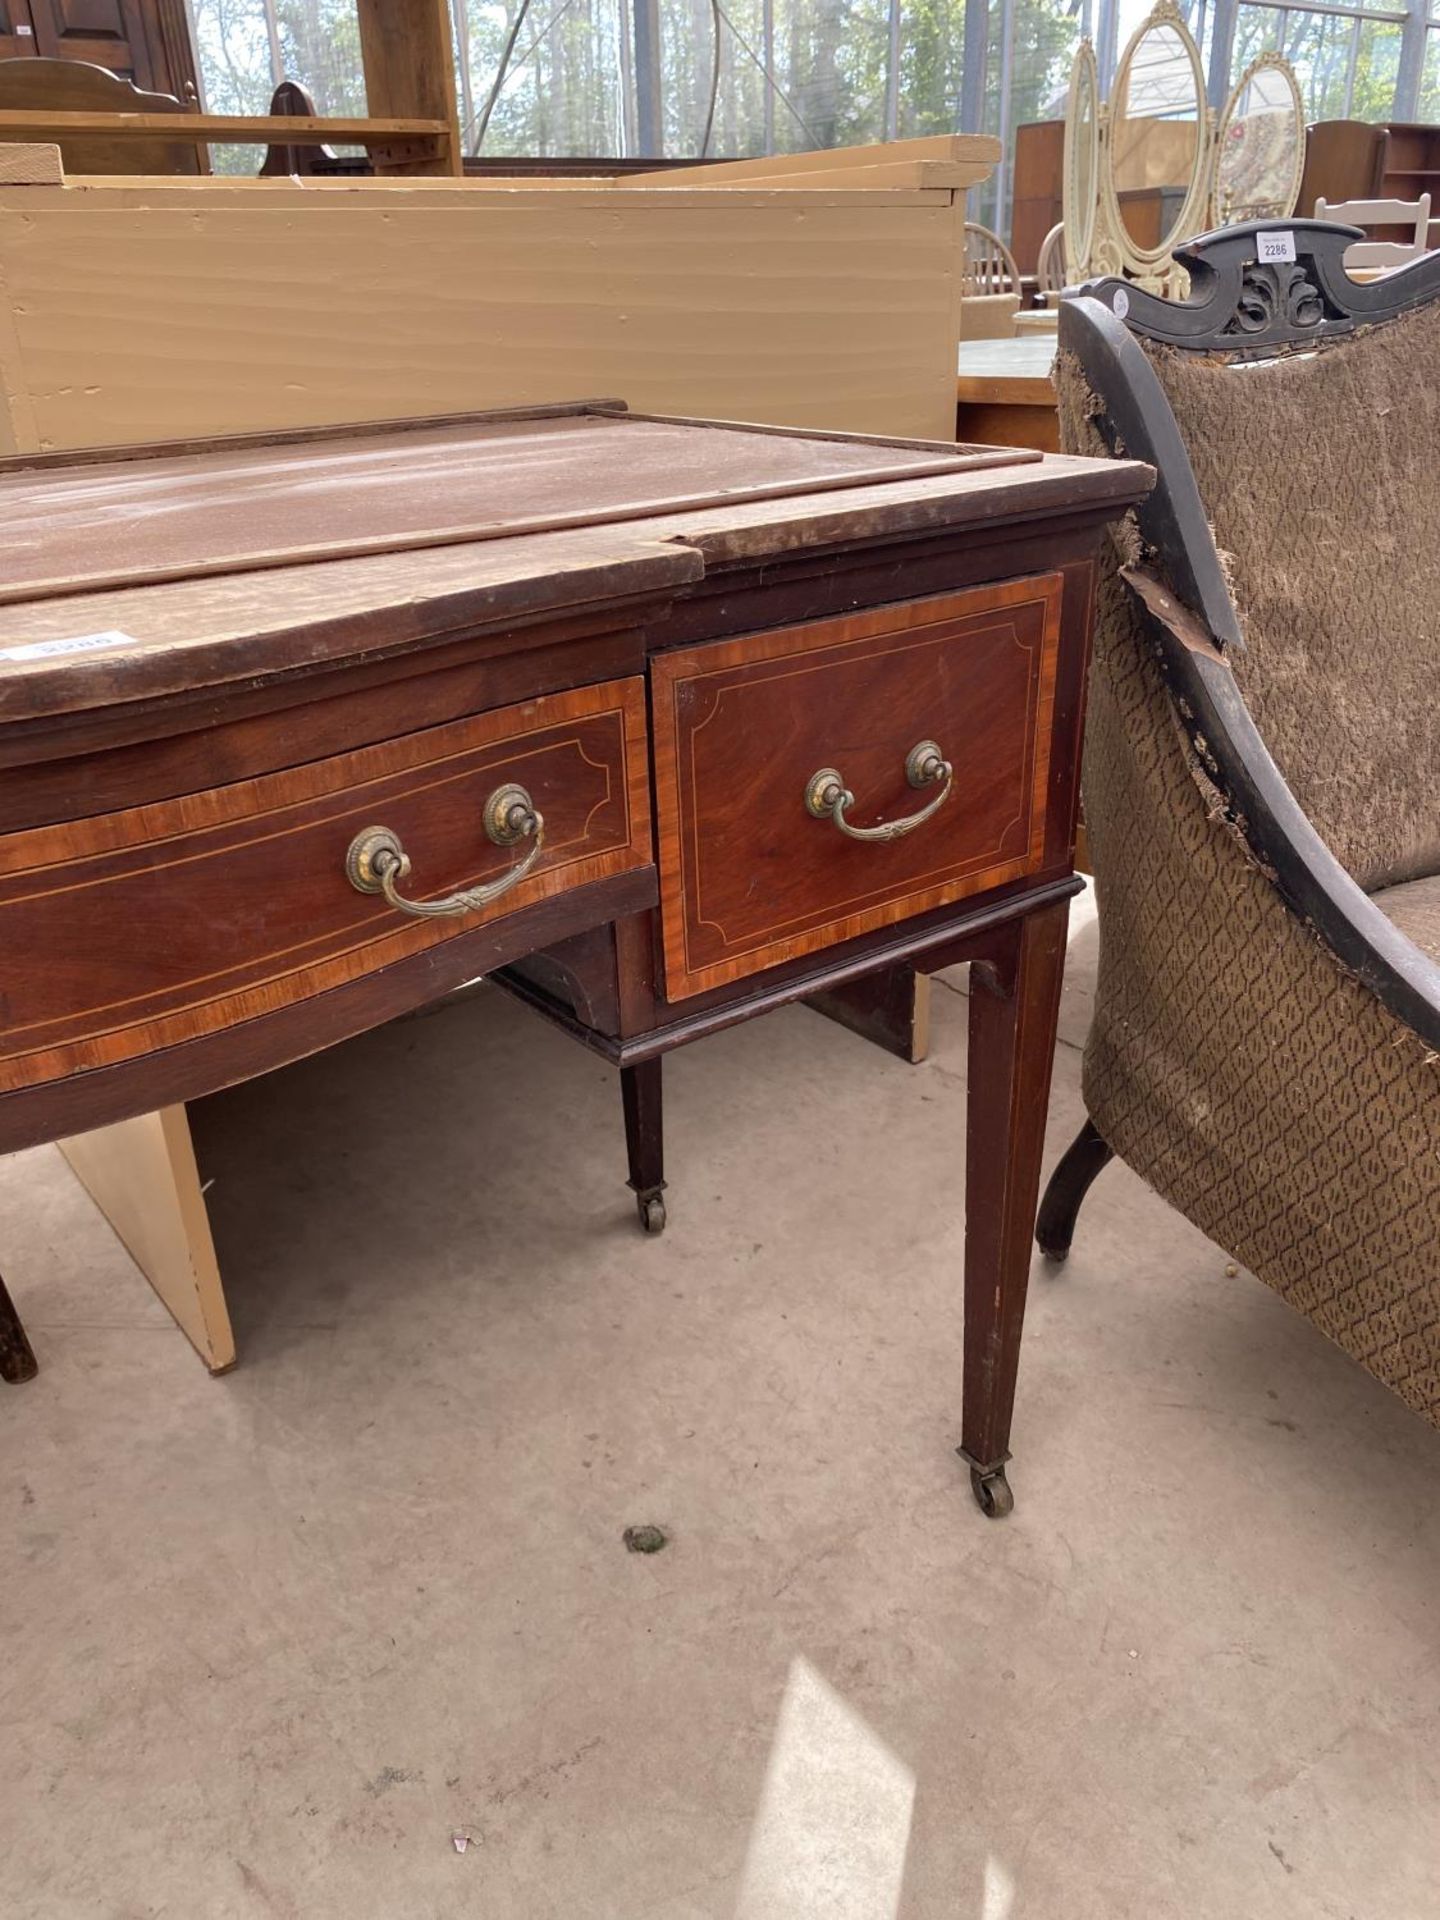 AN EDWARDIAN AND MAHOGANY INLAY DESK ON TAPERED LEGS AND SPADE FEET - Image 3 of 5